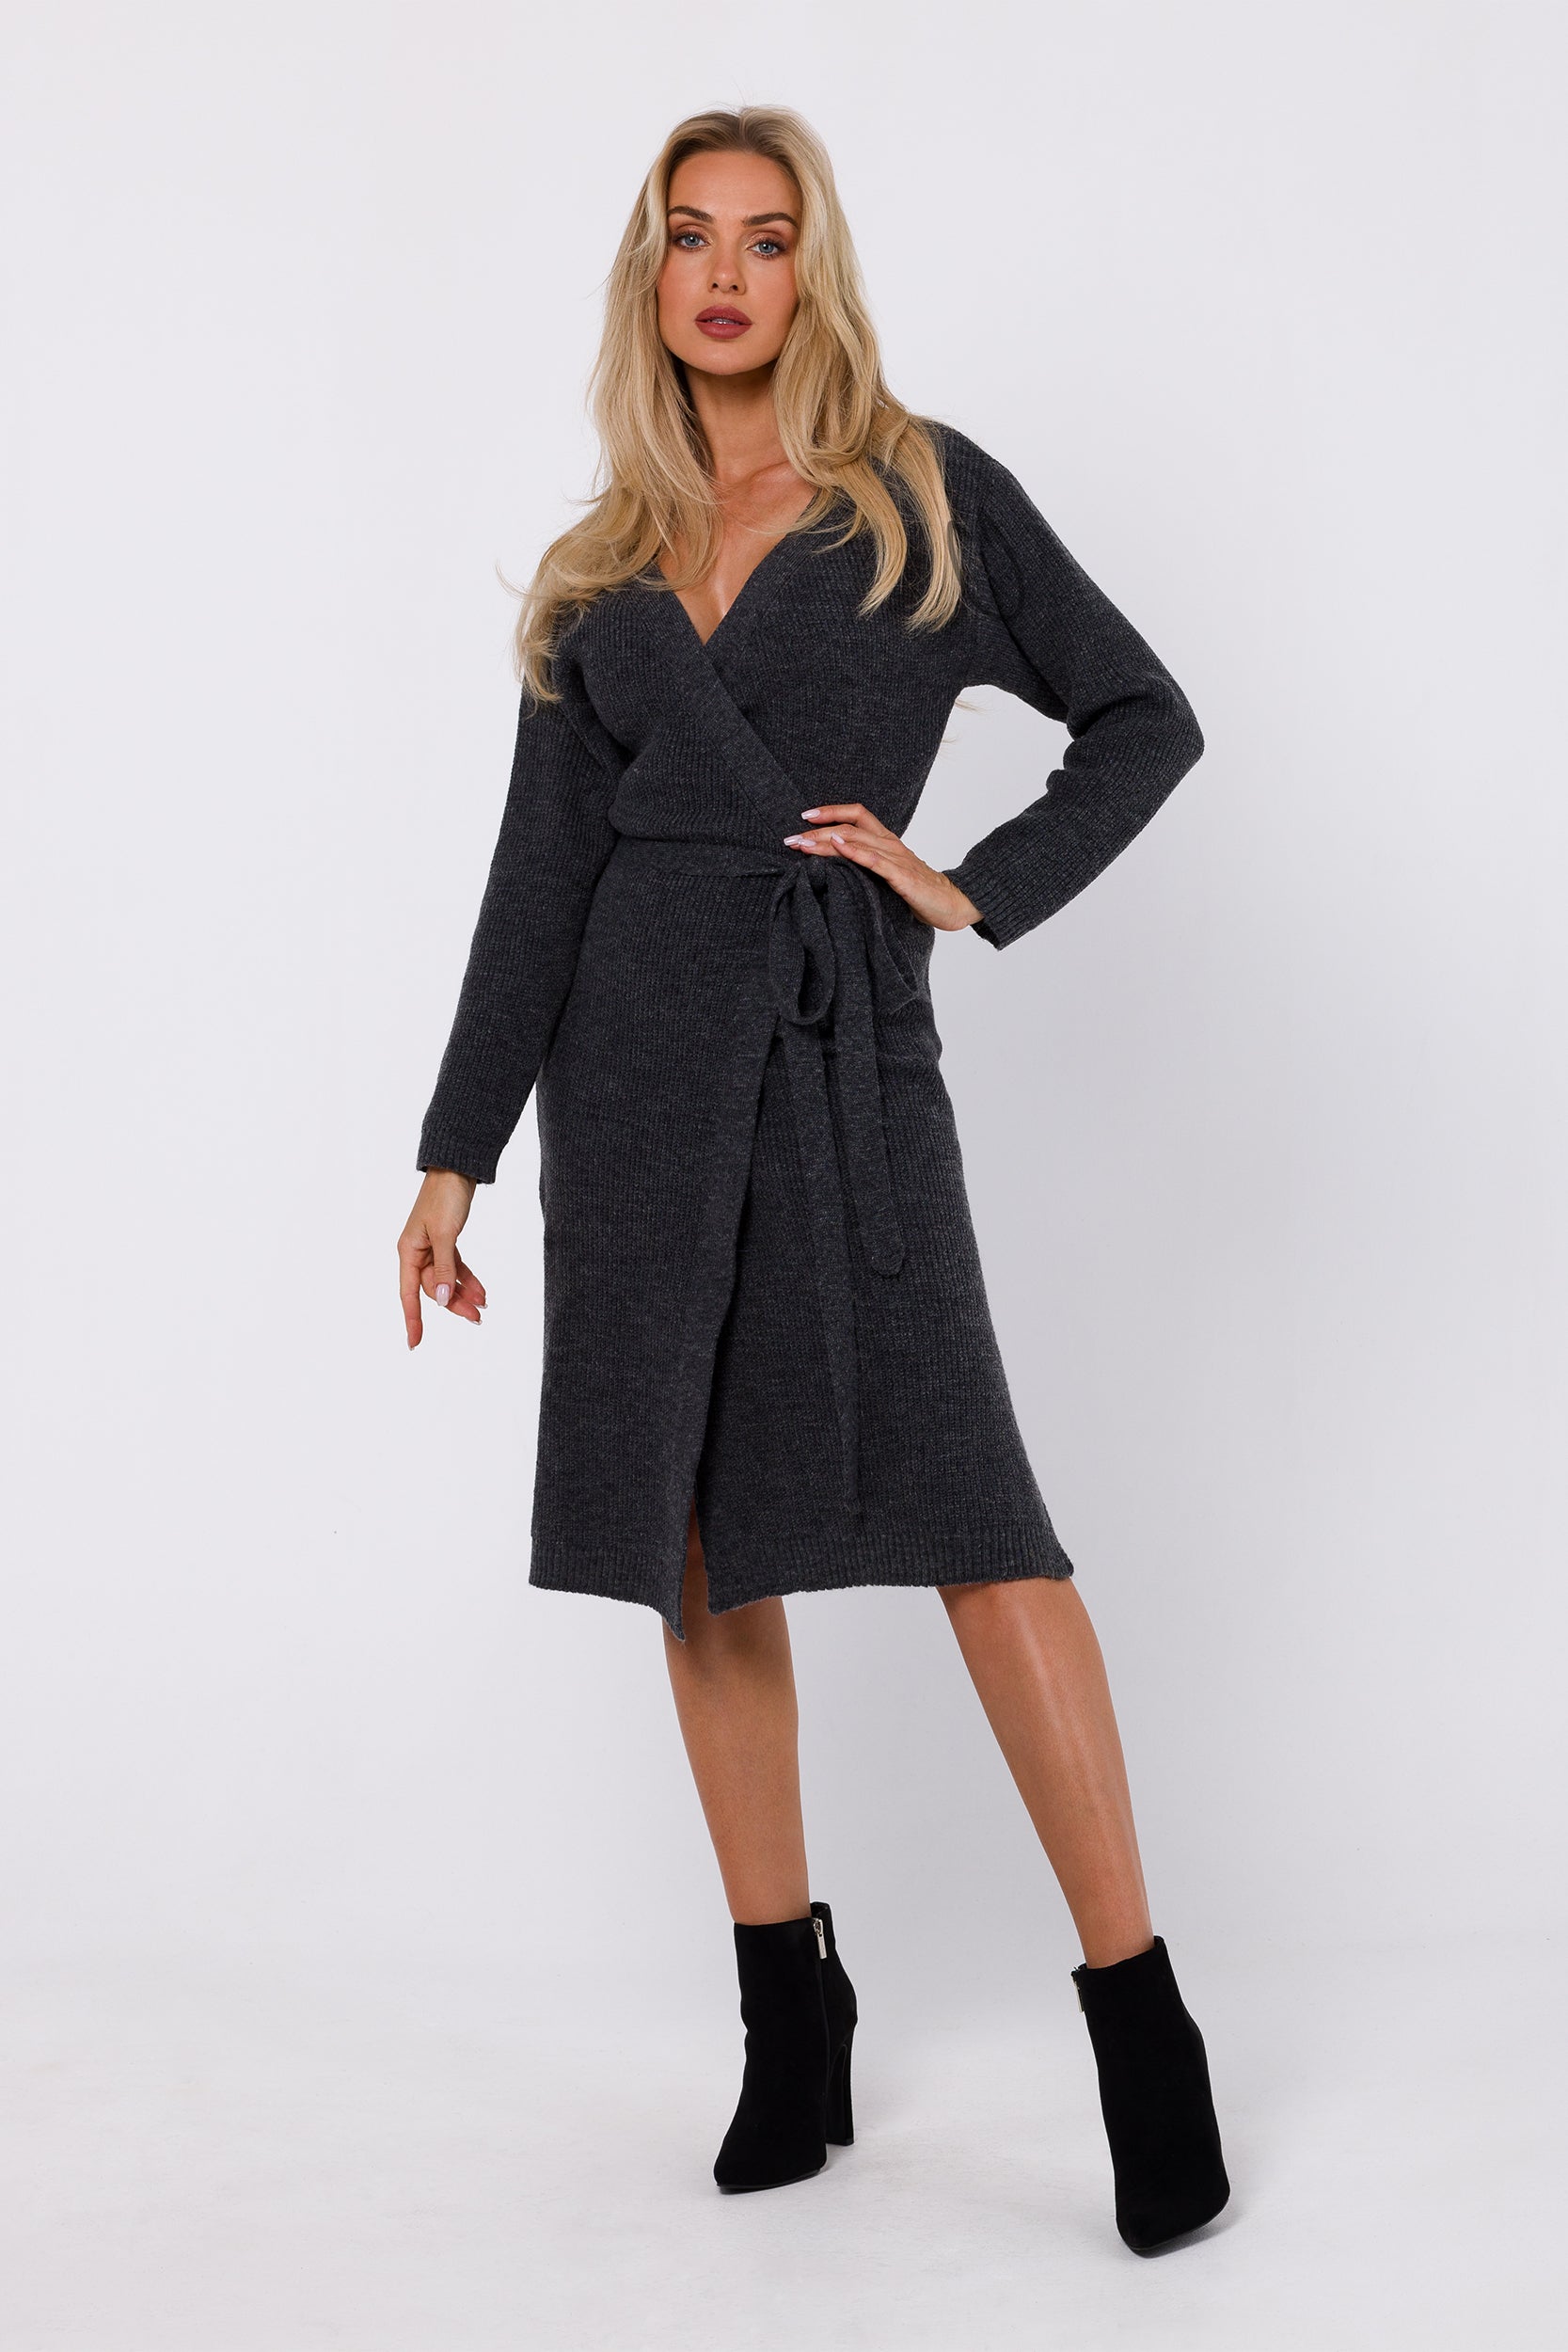 How To Wear A Knit Wrap Dress: Wrap It Up & Unleash Your Style